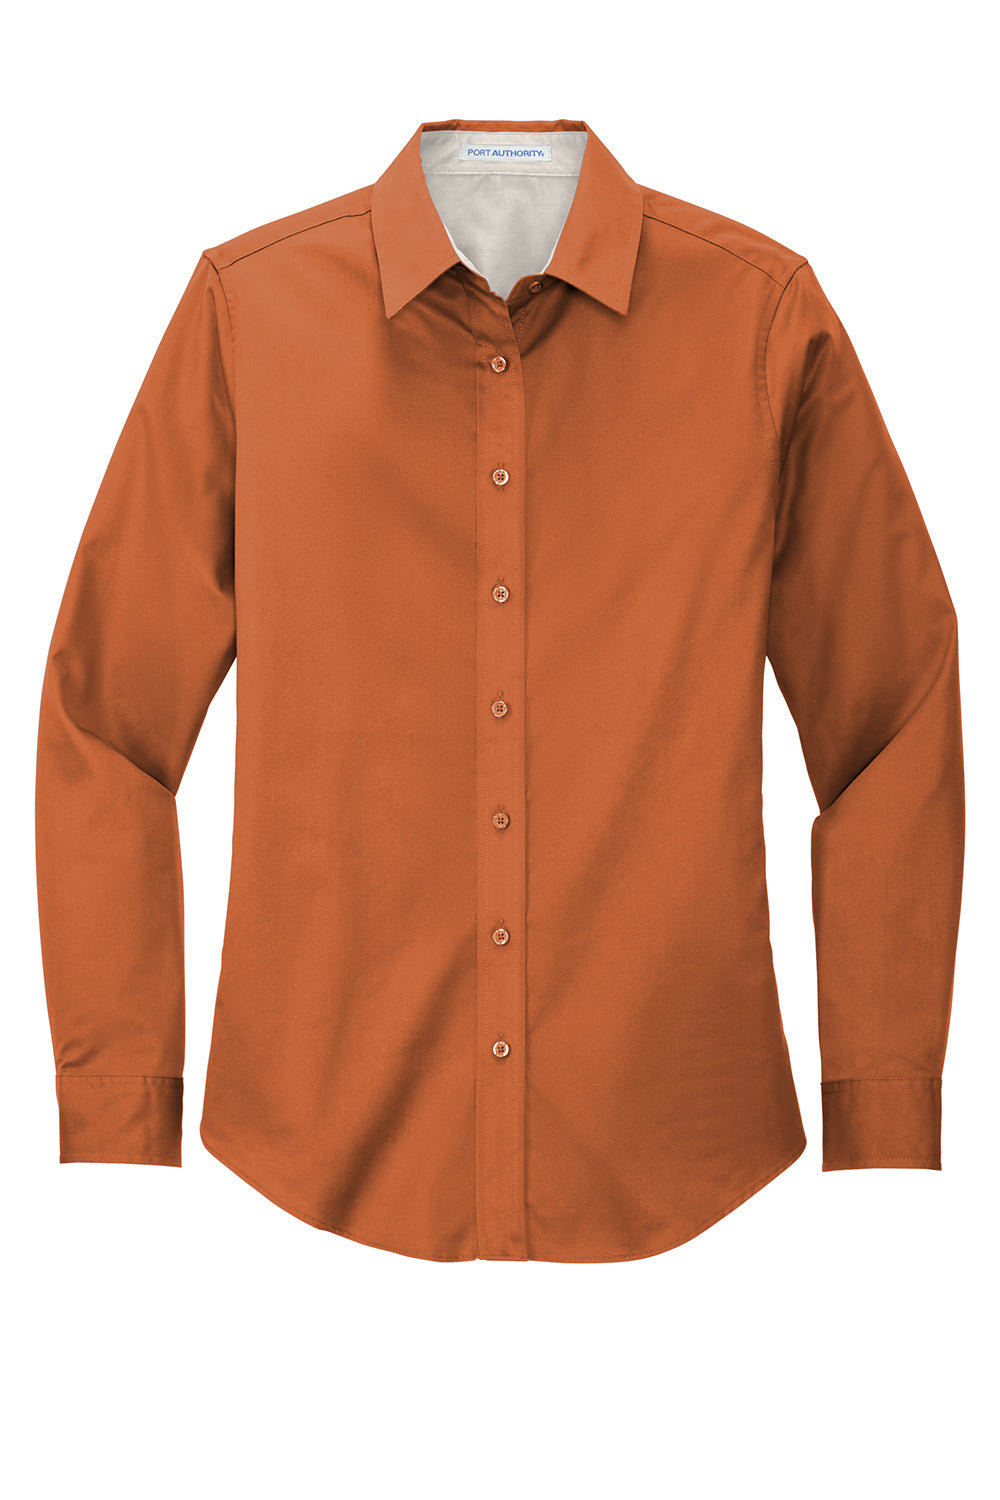 Port Authority L608 Womens Easy Care Wrinkle Resistant Long Sleeve Button Down Shirt Texas Orange Flat Front